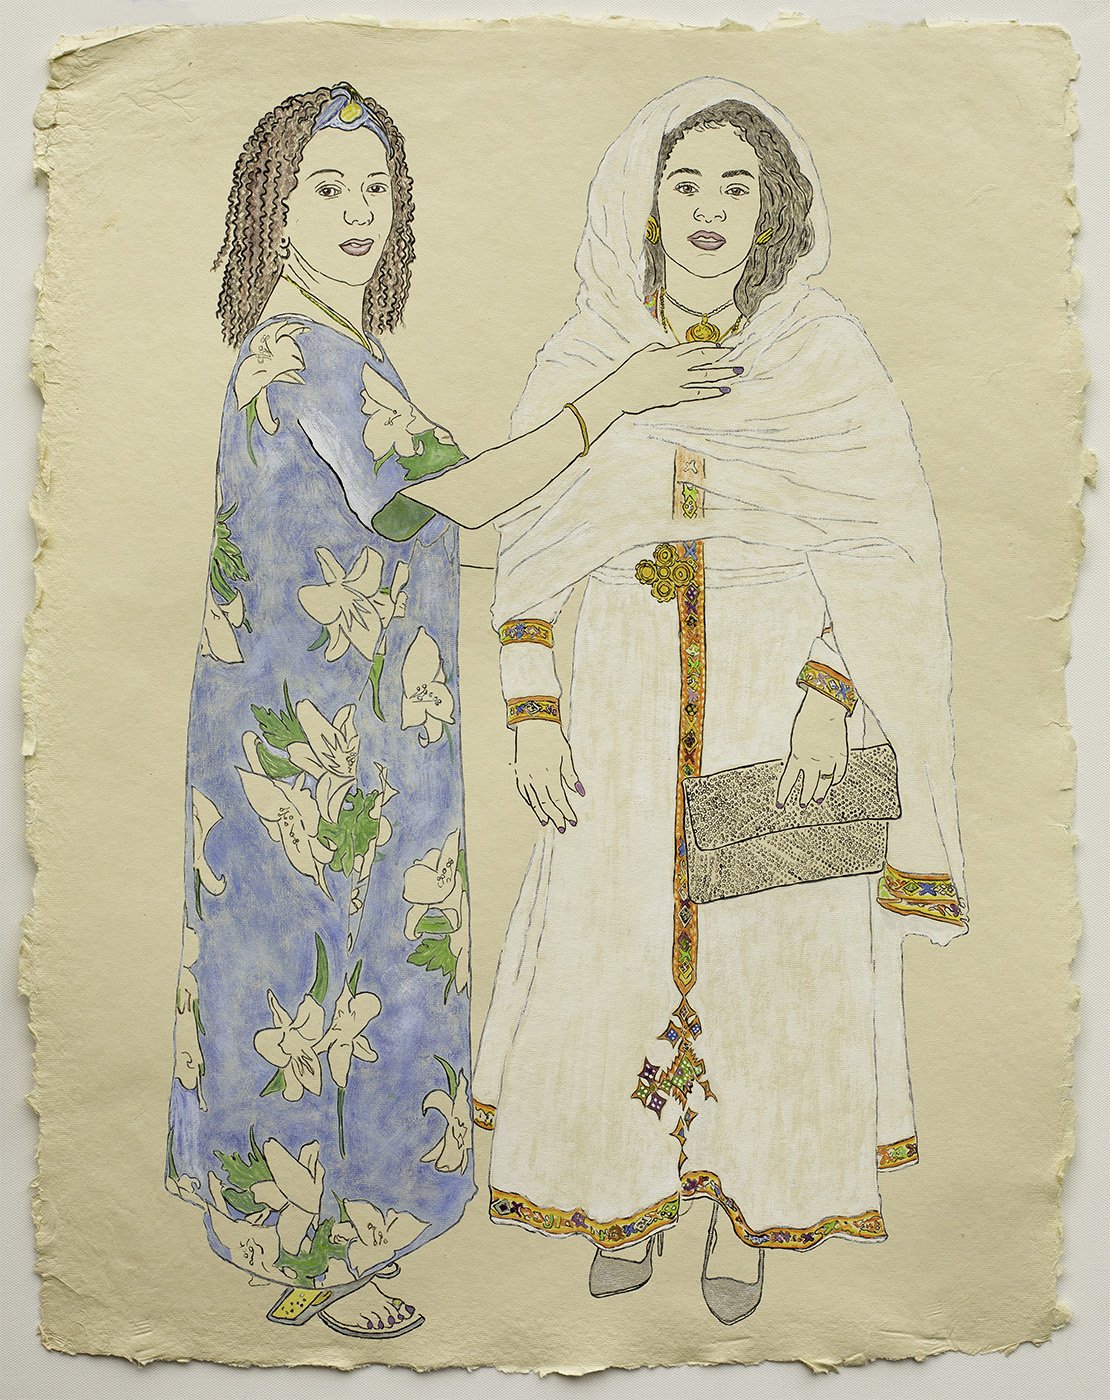   Available    Two Friends in the Ethiopian Community   2021, ink, watercolor, gouache on handmade paper, 25” x 19” 